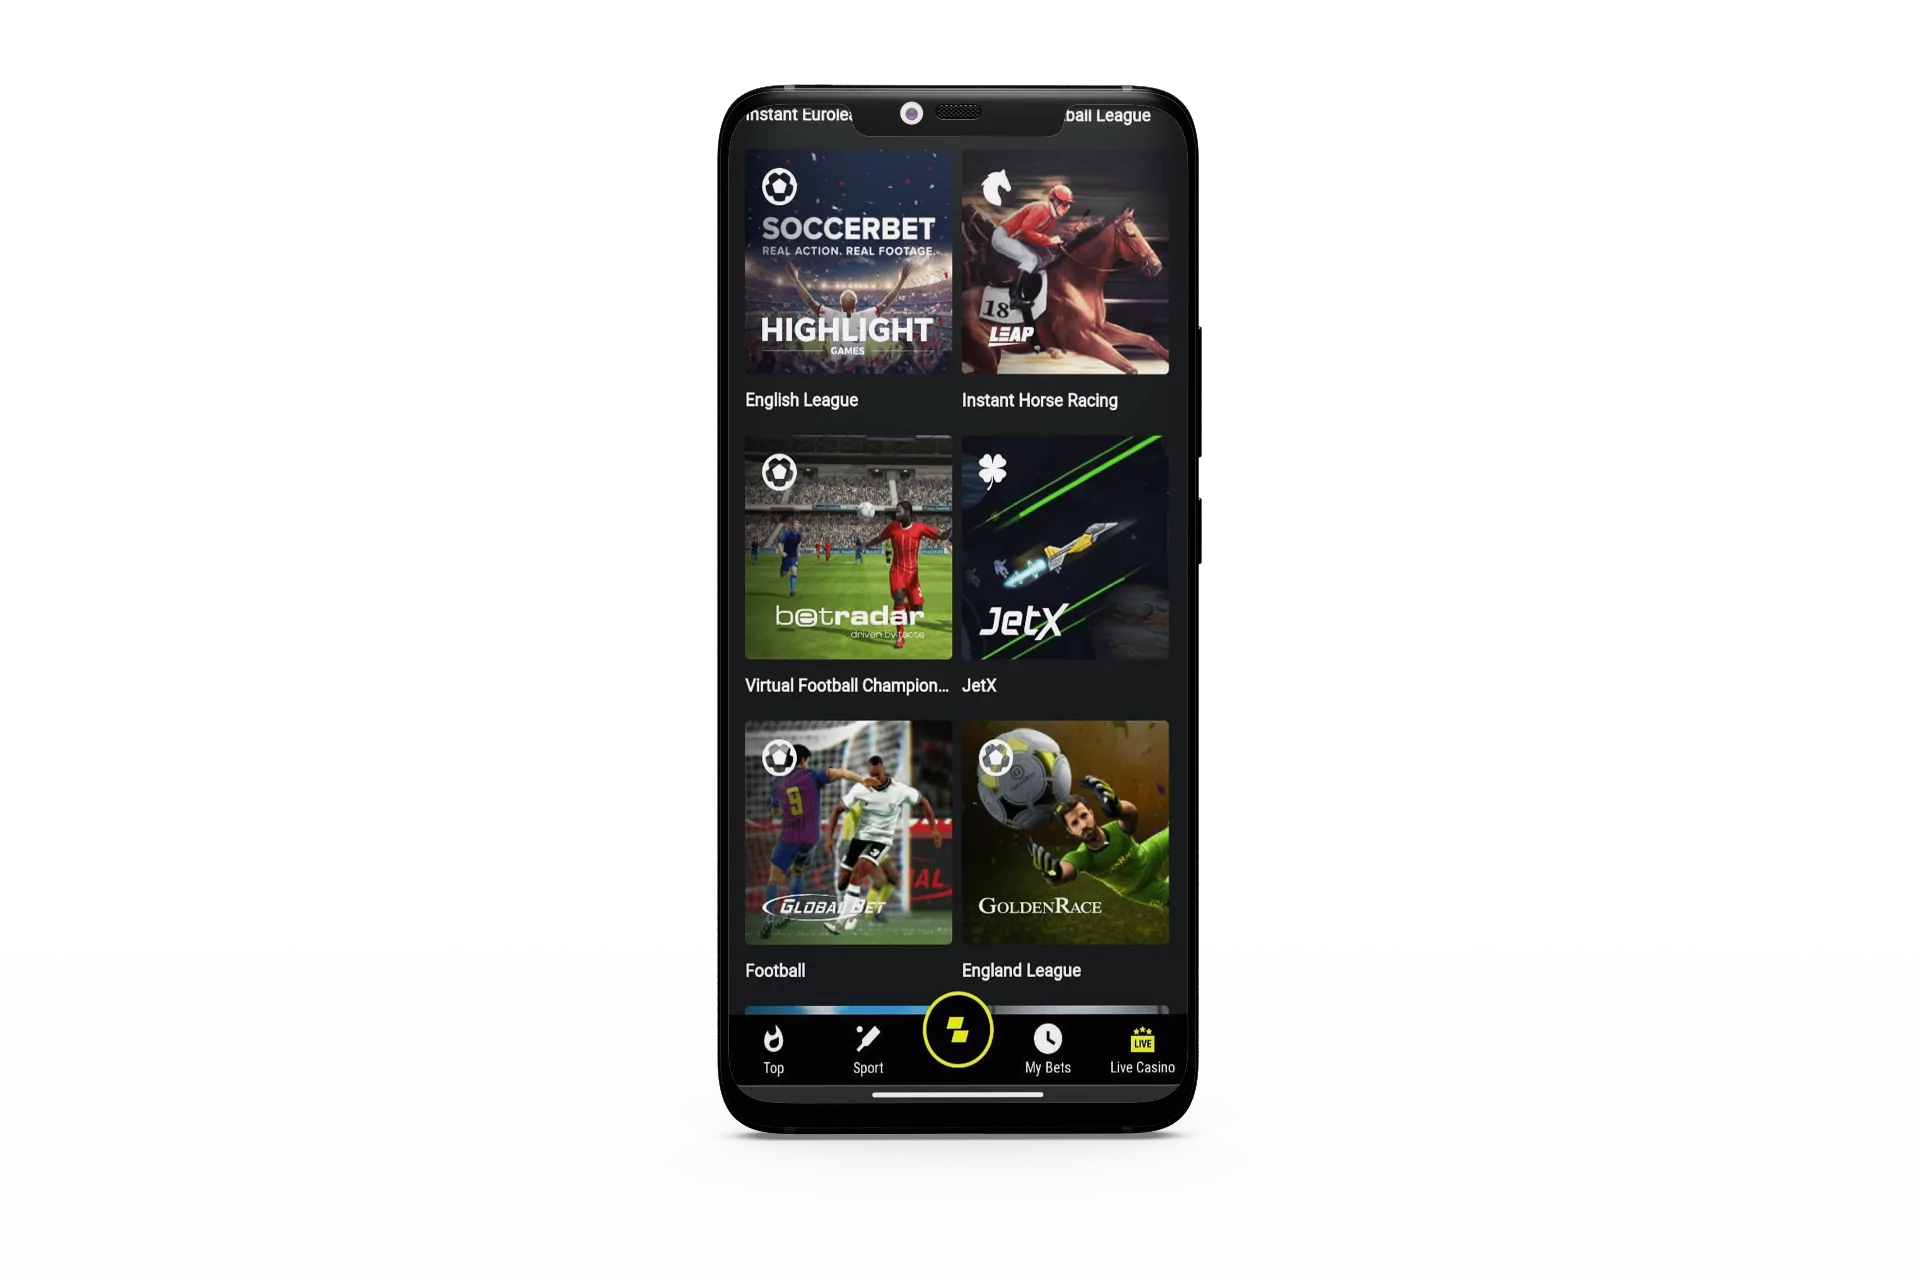 Also, you can bet on cybersport in Parimatch app: Dota, CS:GO, League of Legends and others.